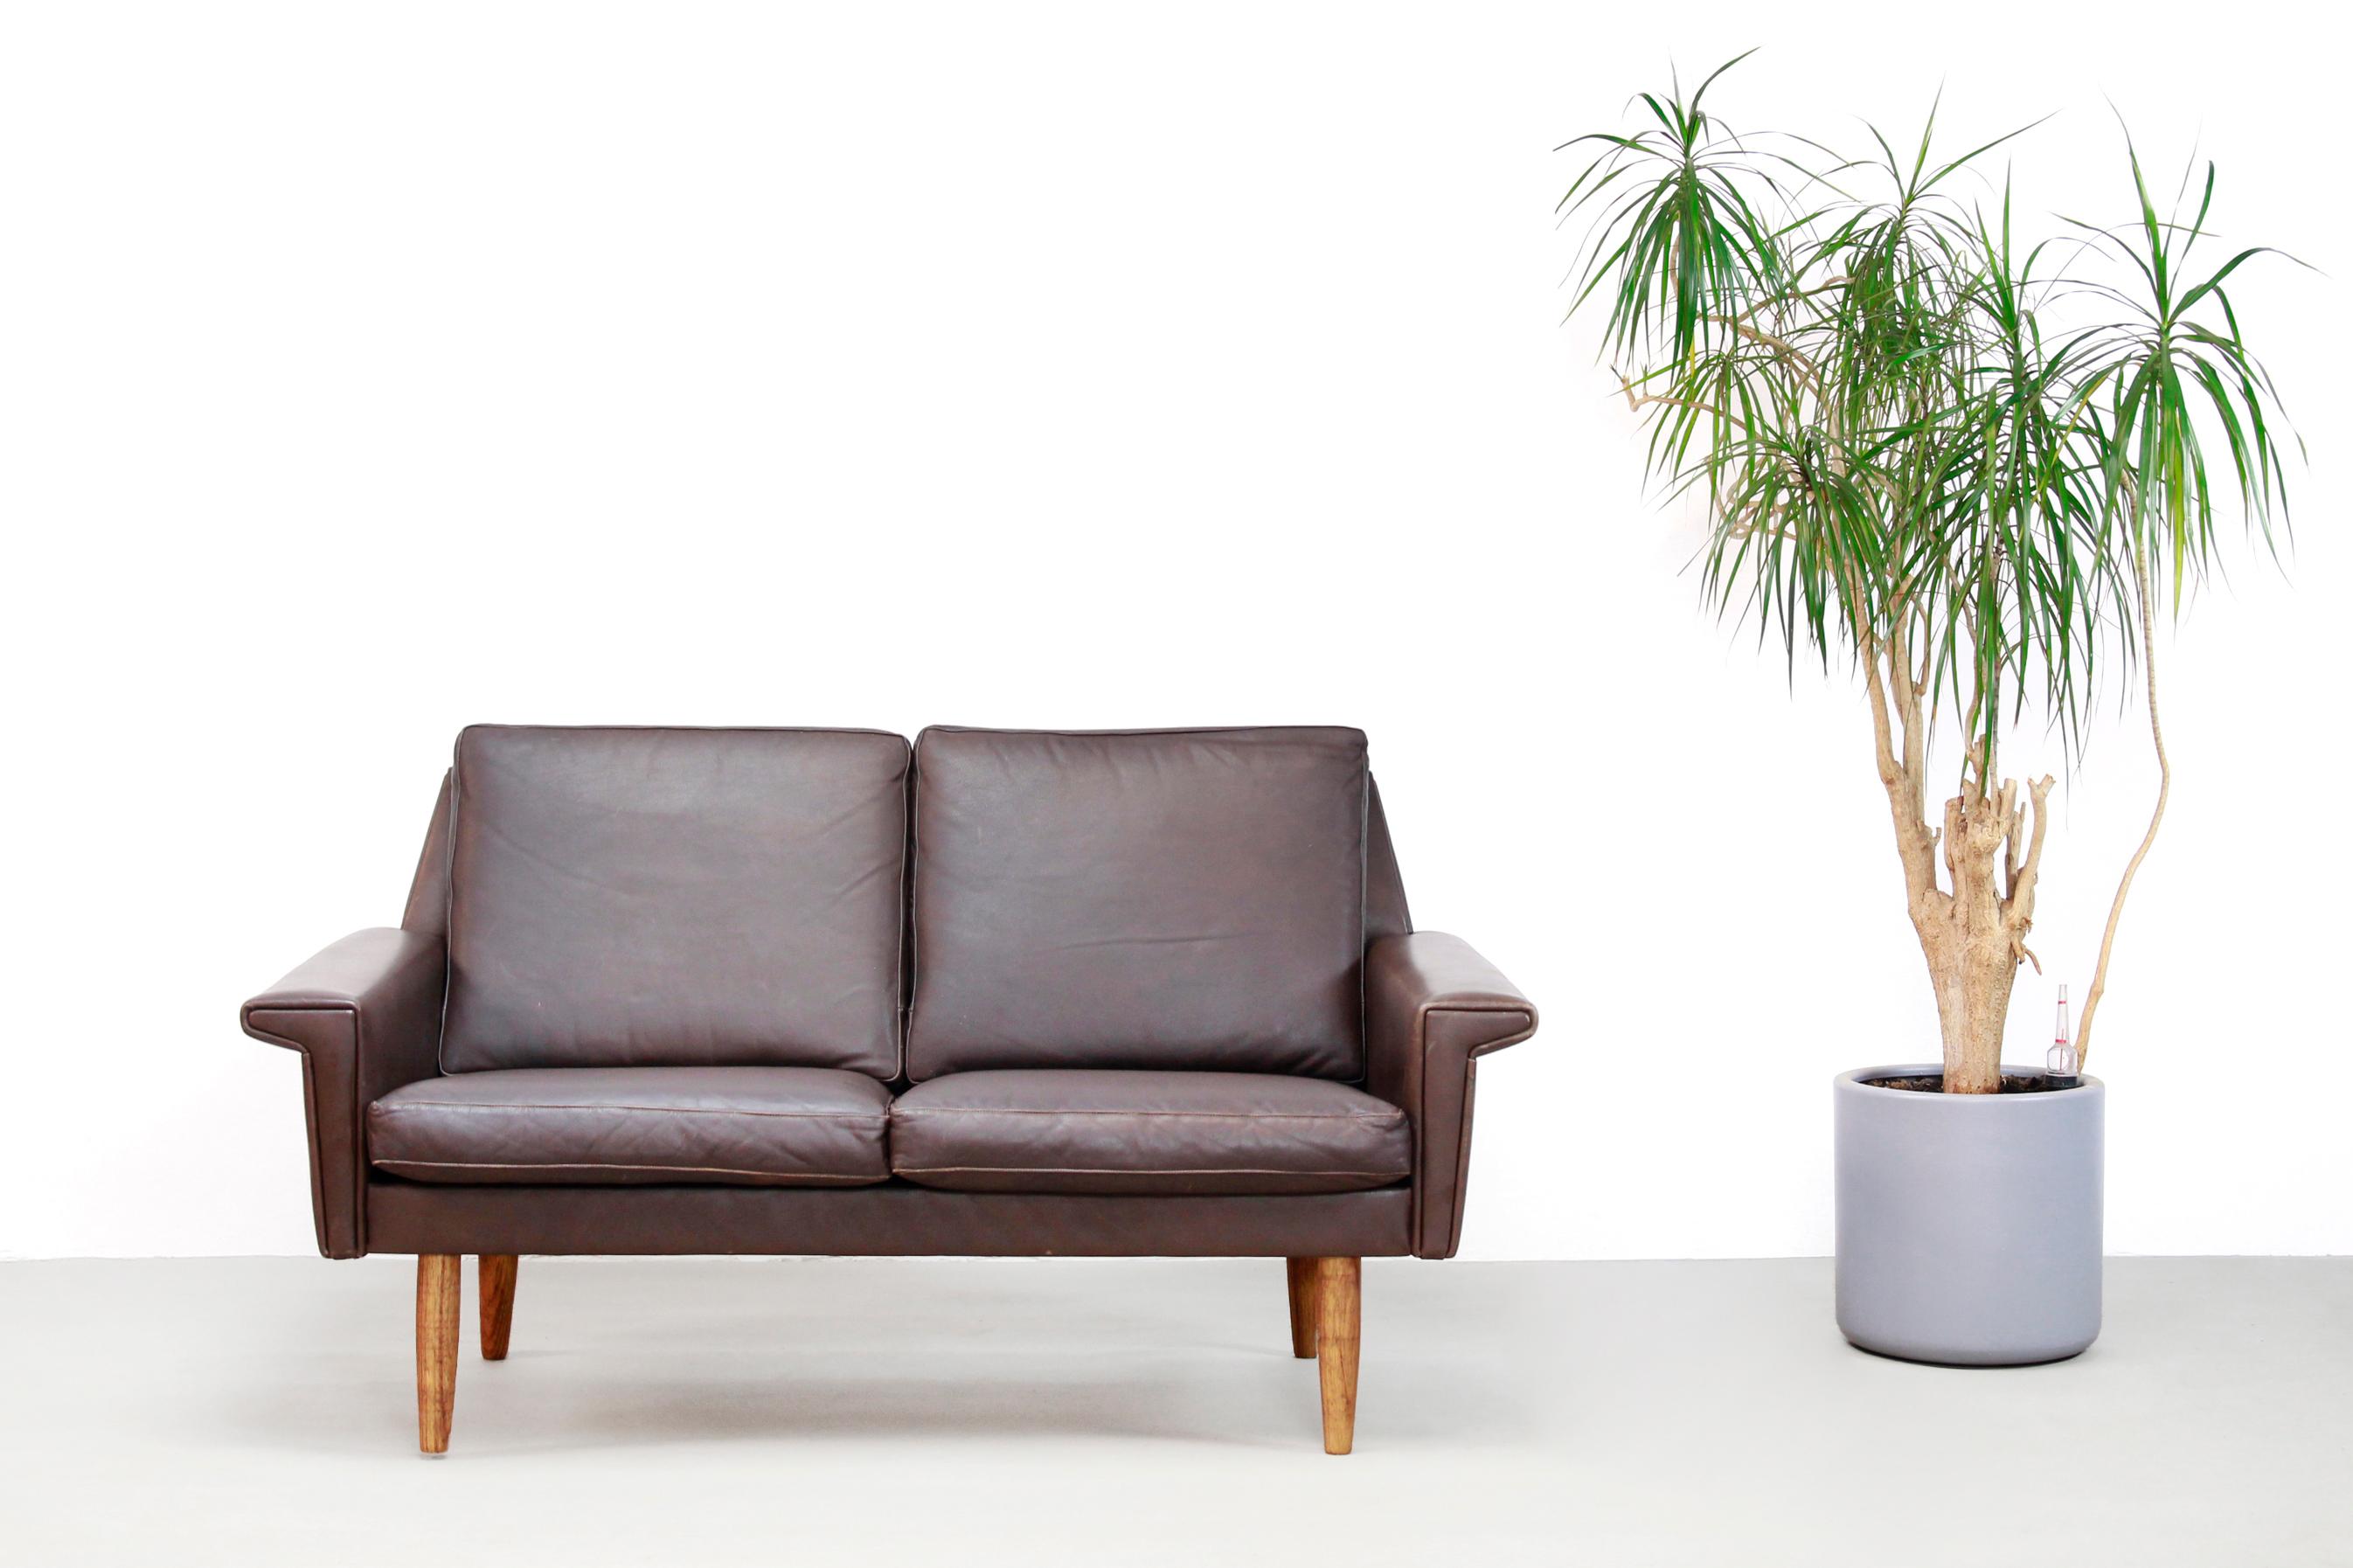 Very minimalistic and spacious looking set of brown leather Danish design sofas, produced by Vejen Polstermøbelfabrik from Denmark in the 1960s. This set consists of a two-seater and a three-seat made of brown leather with conical wooden legs. The